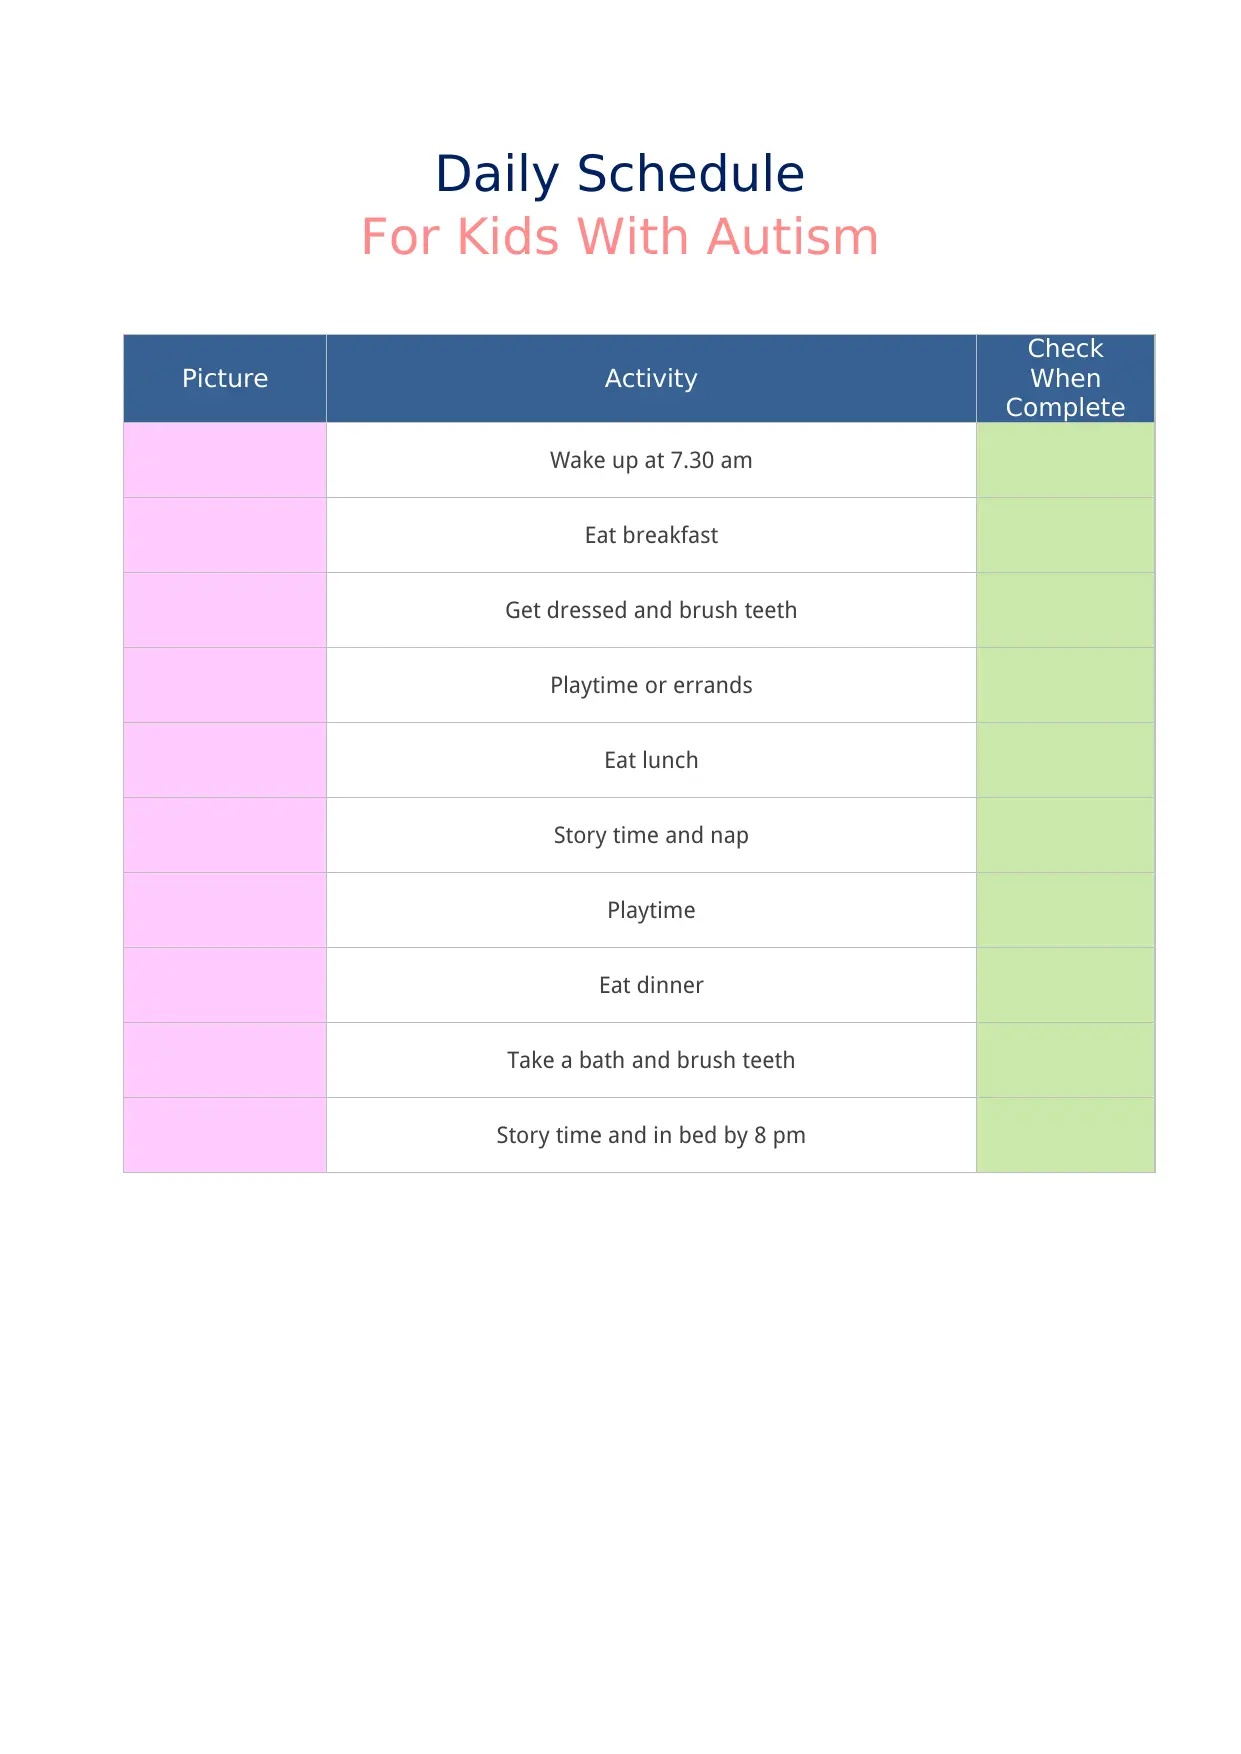 Daily Schedule Template for Kids with Autism